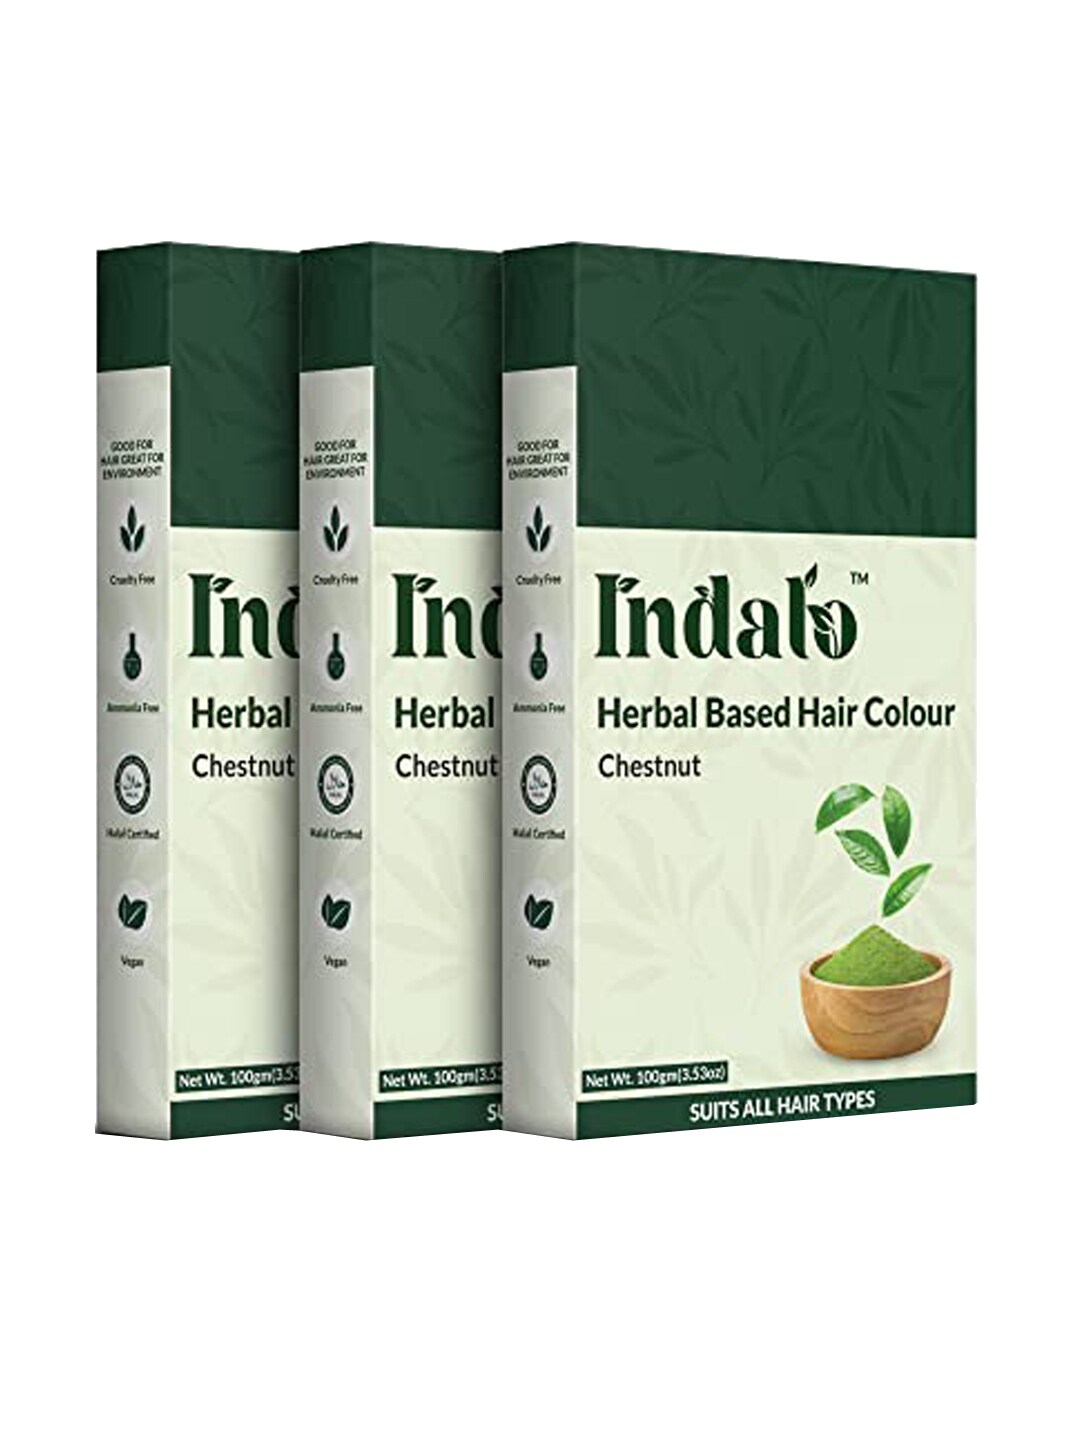 INDALO Set Of 3 No Ammonia Herbal Based Hair Colour with Amla & Brahmi 100g Each- Chestnut Price in India